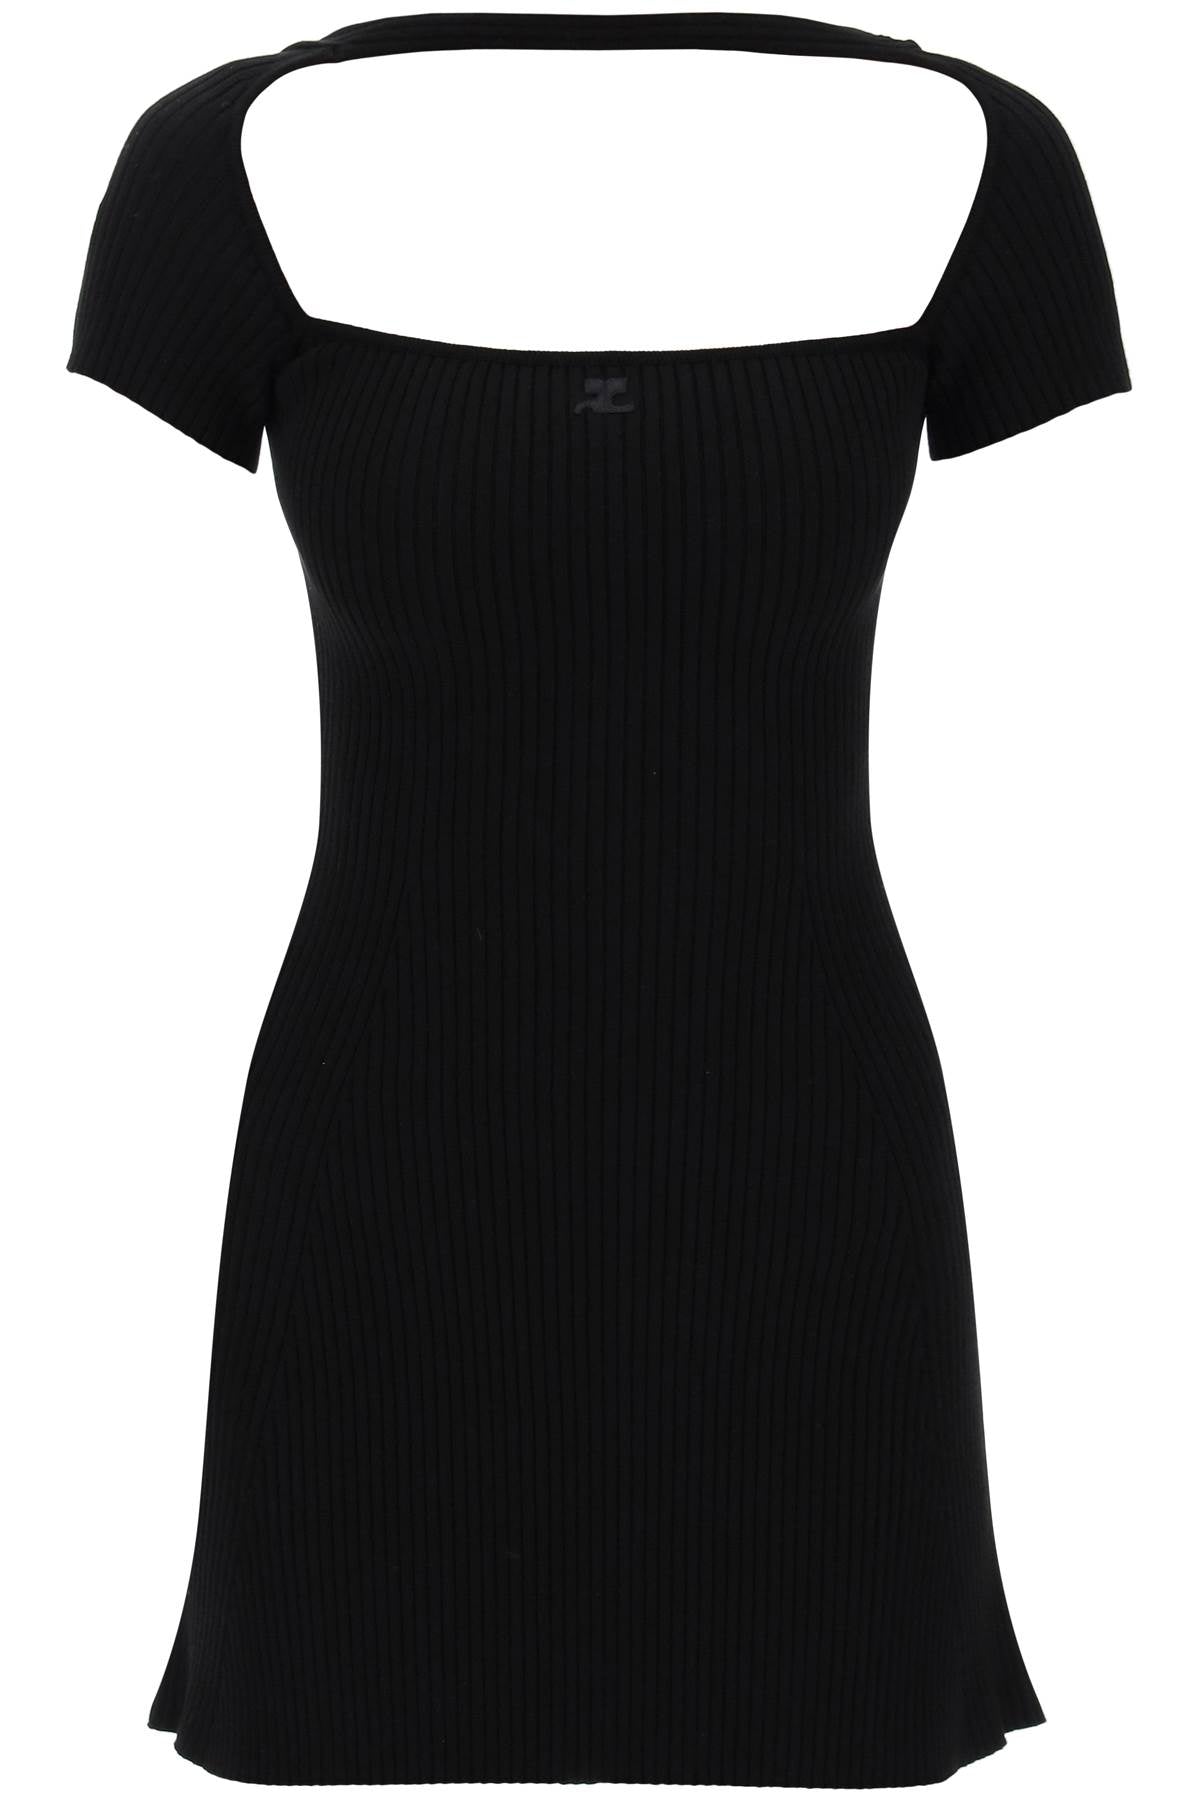 COURREGÈS Black Ribbed T-Shirt Dress for Women - Flared Silhouette and Embroidered Logo in Tone